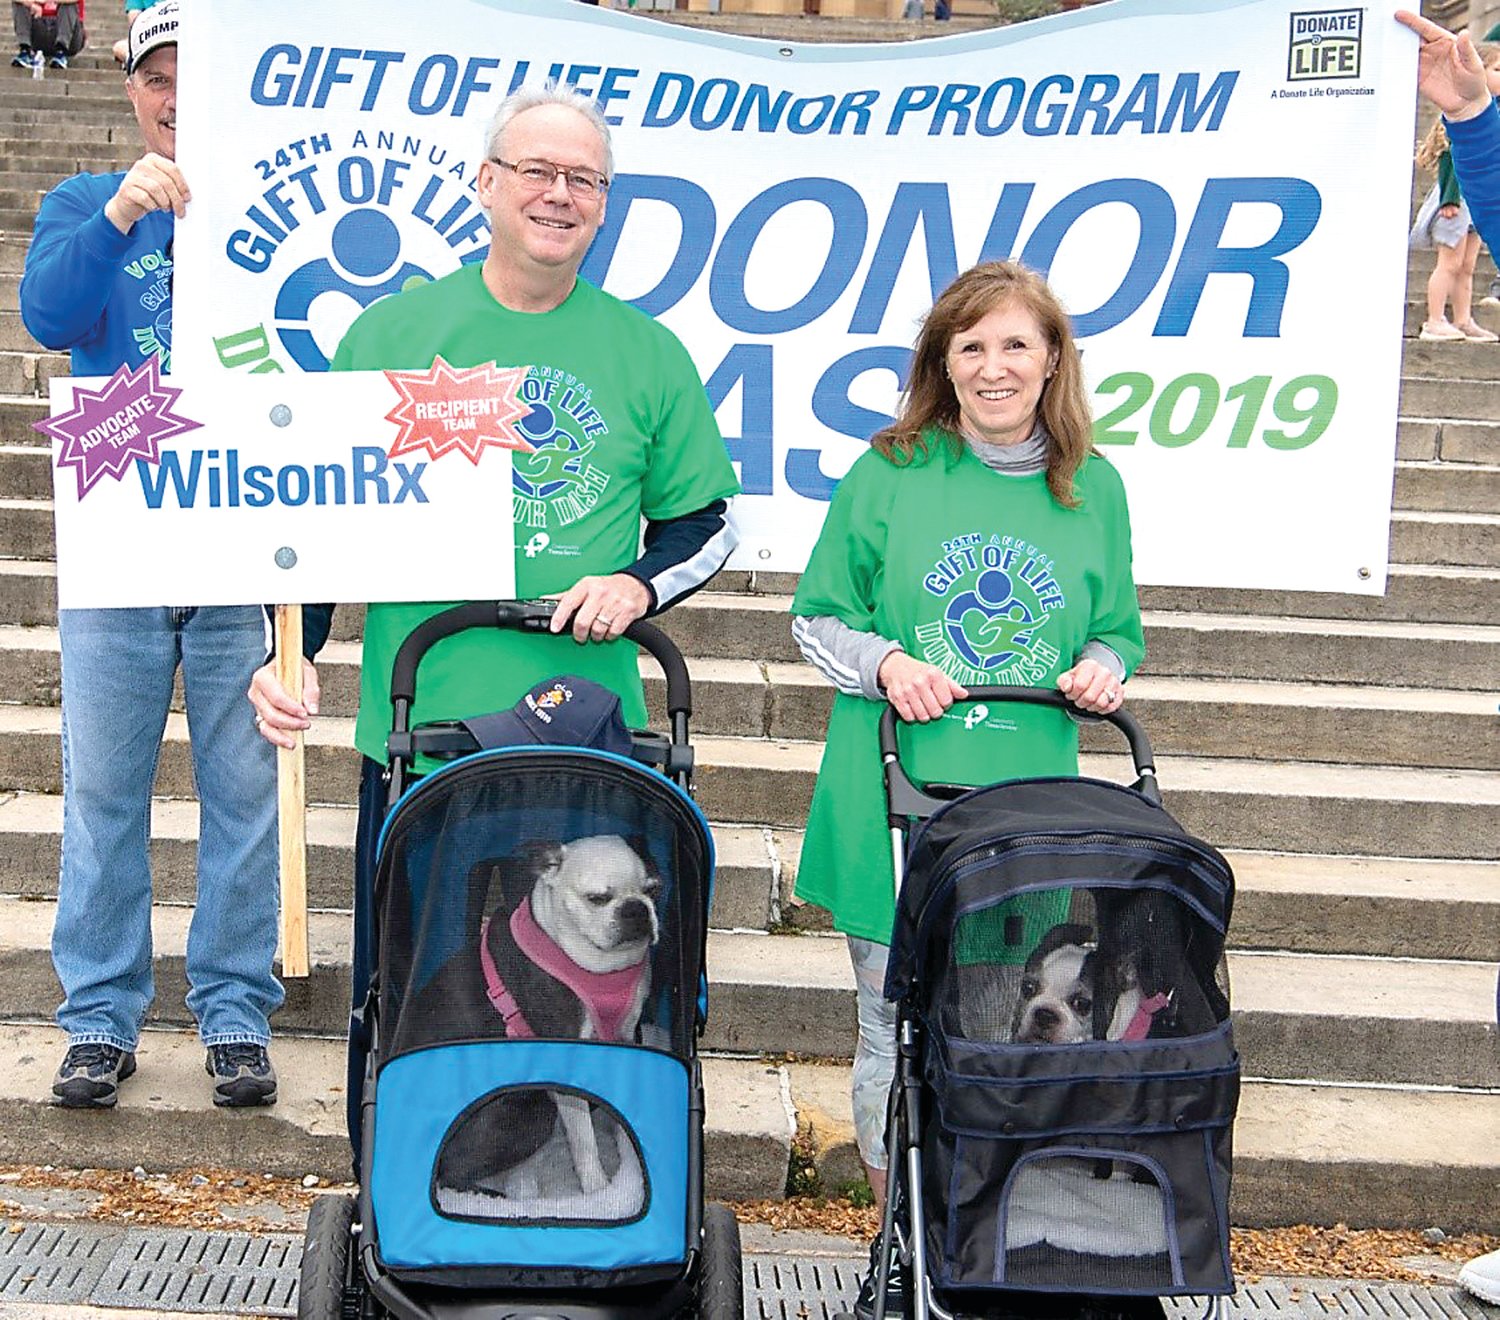 Jim and Fran Wilson with Bella and Lola (strollers) celebrate completing the 24th annual Gift of Life DASH for Organ Donation Awareness held on April 14 in Philadelphia.